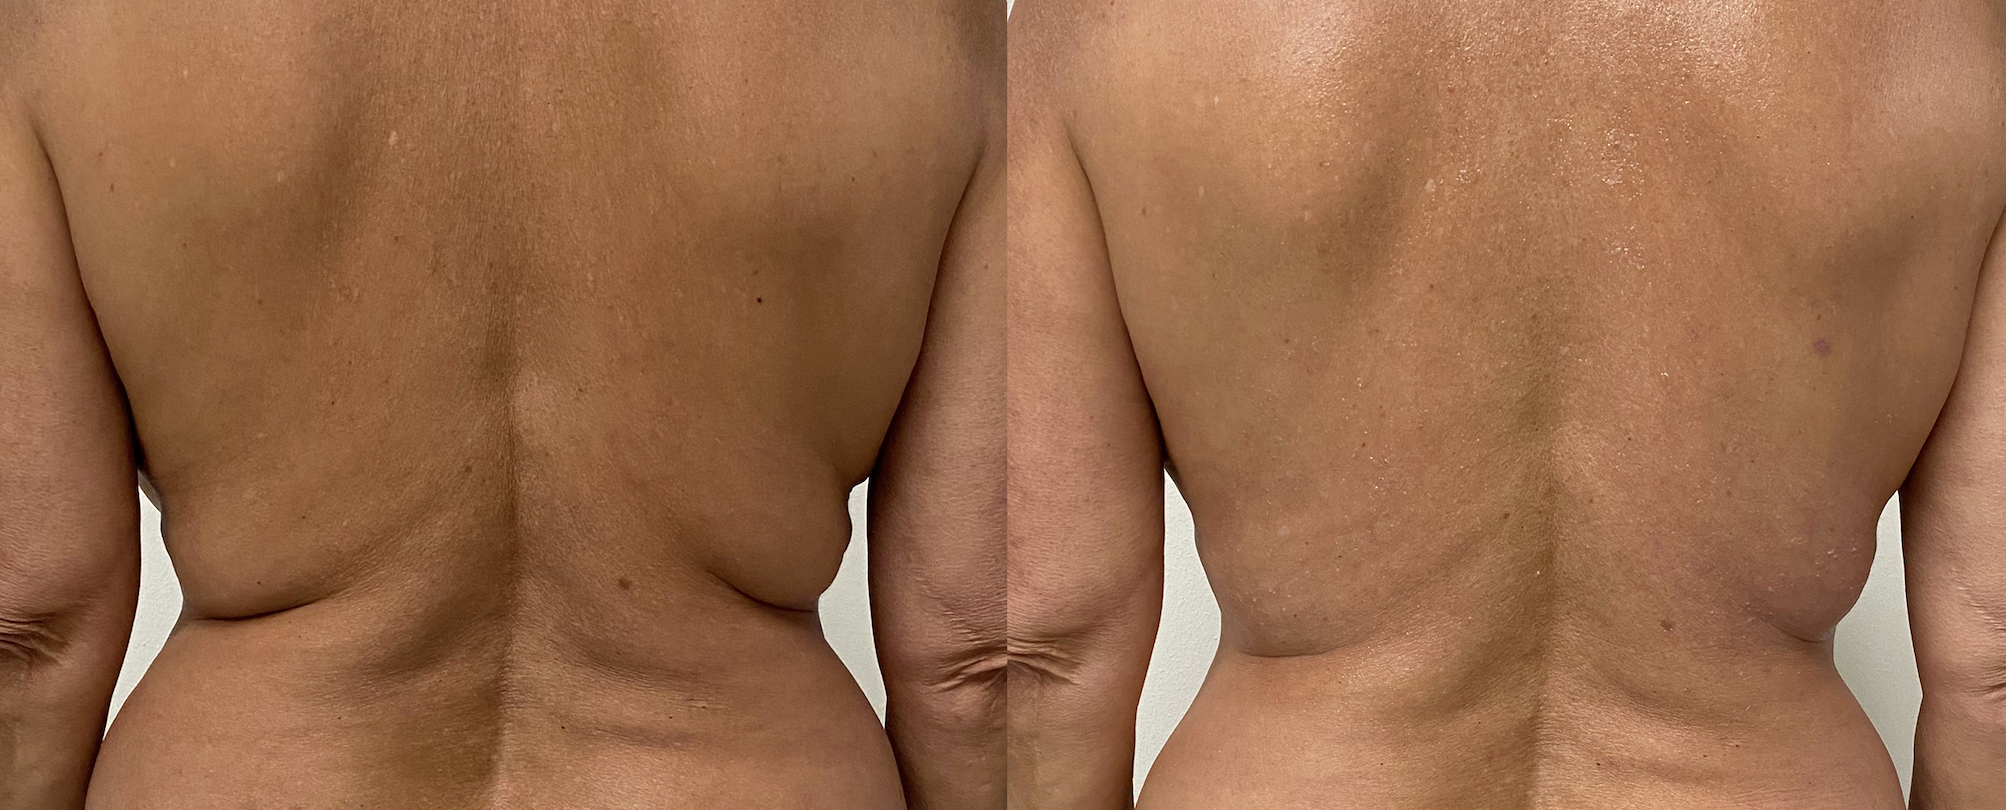 before and after image of a patients back